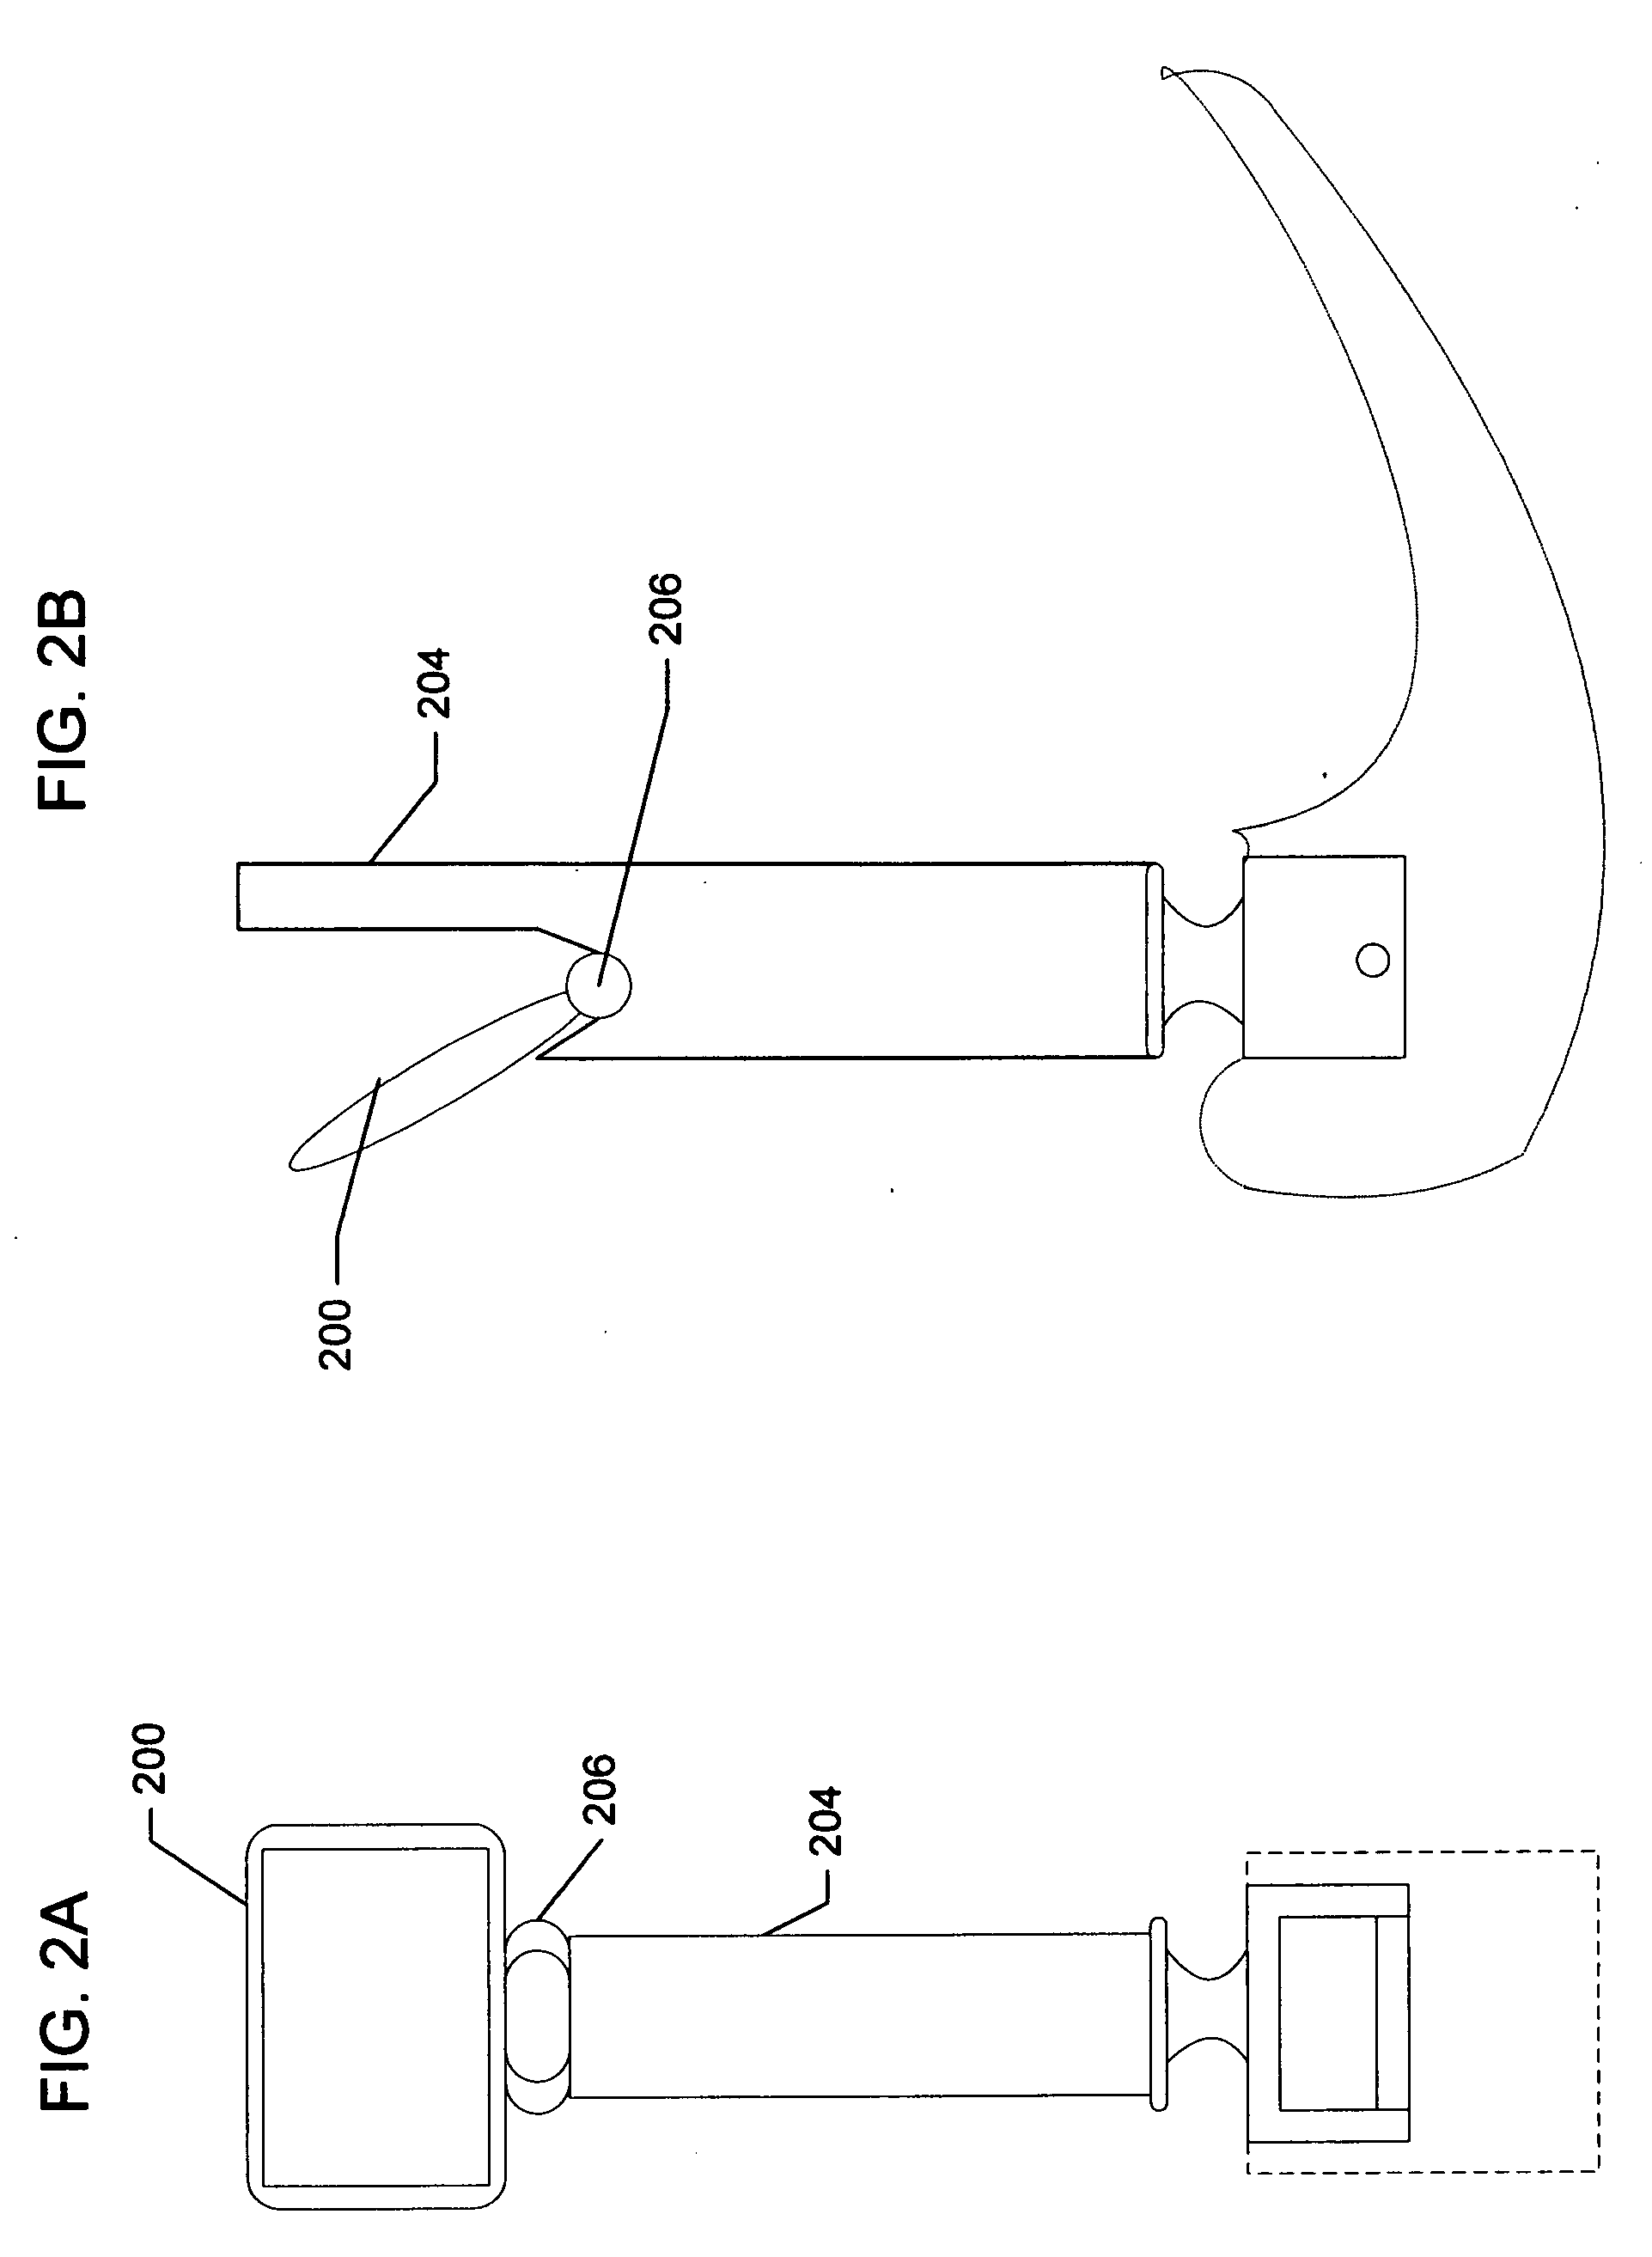 Apparatus and method for imaging-assisted intubation using pre-existing practitioner skill set